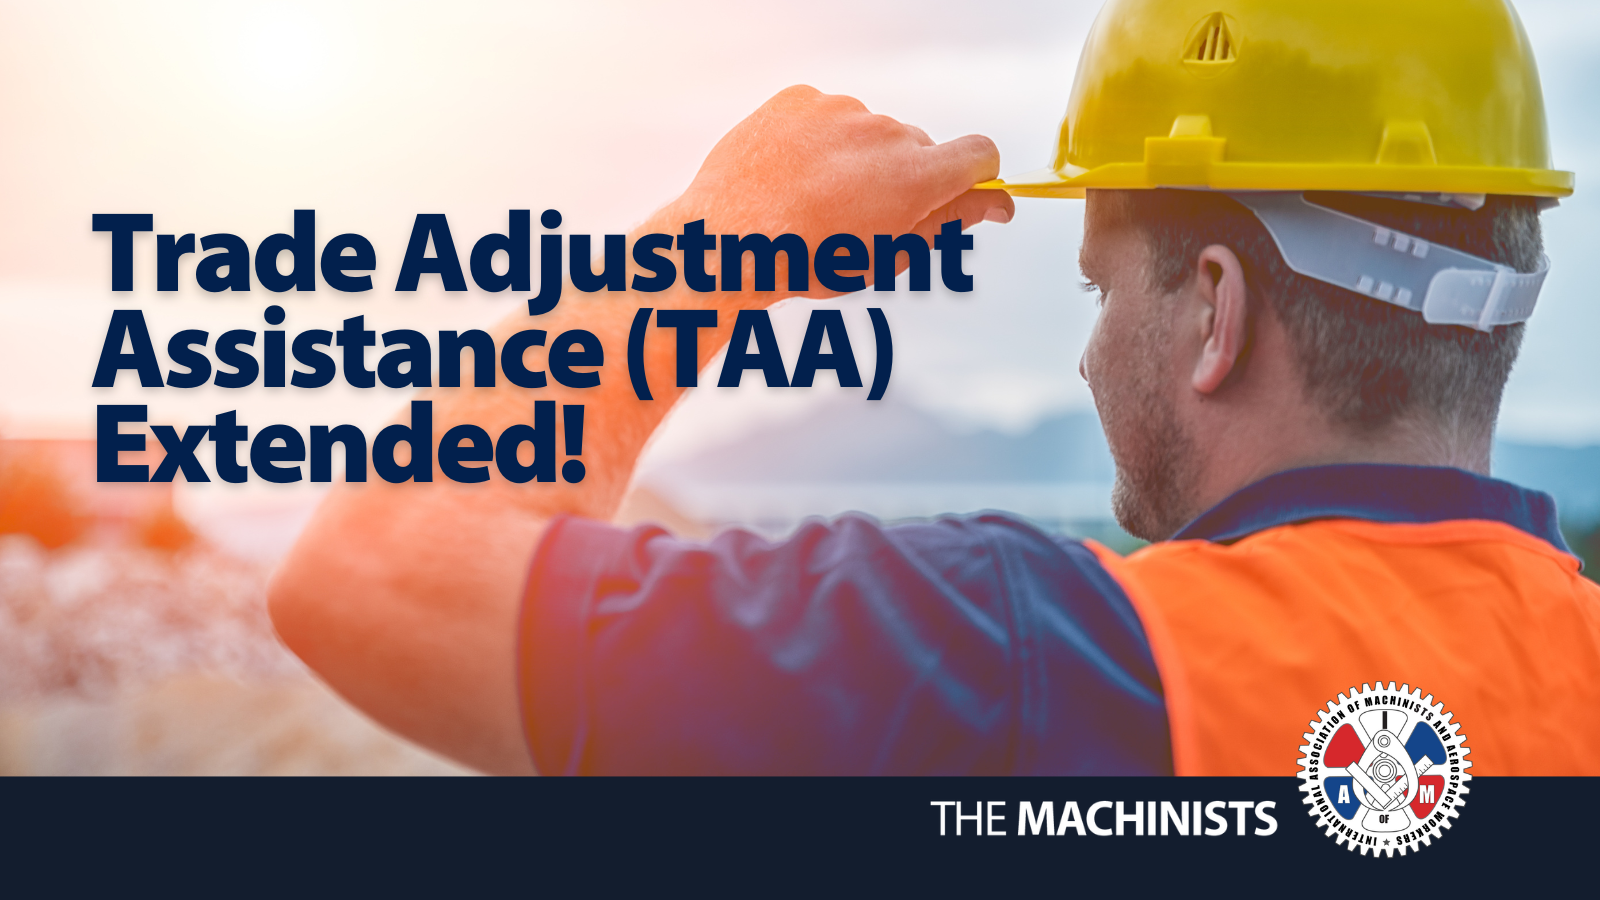 Machinists Union’s Advocacy Helps Protect Trade Adjustment Assistance Program